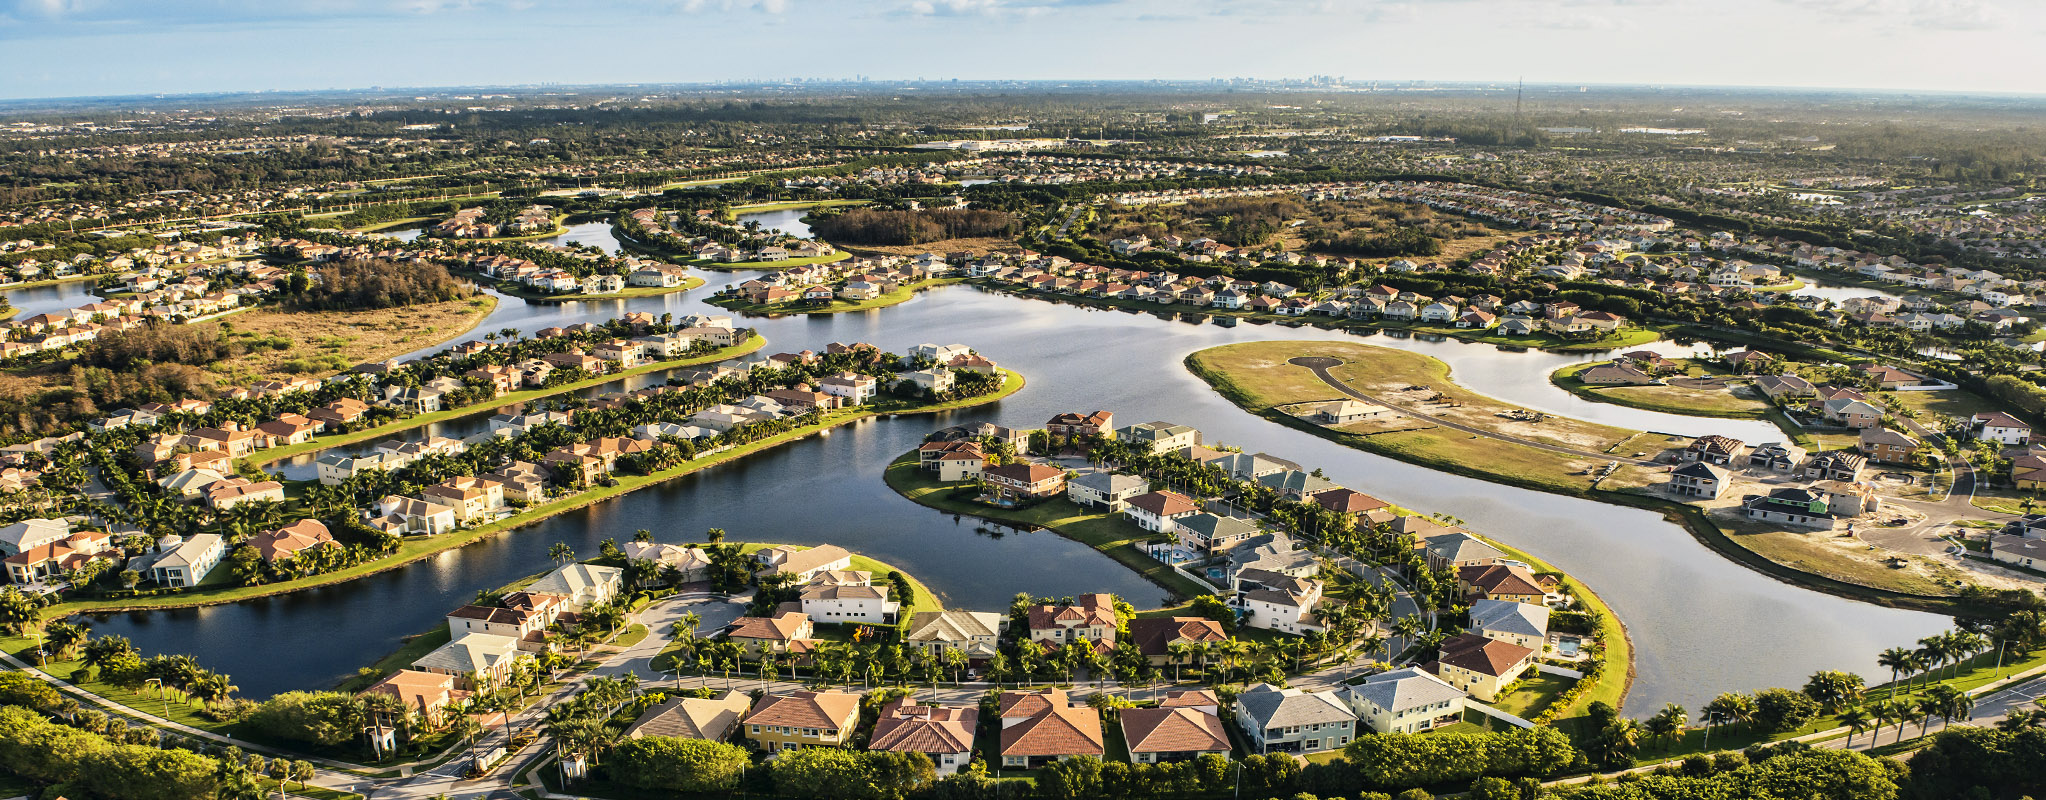 rental property for sale in Florida lowlands